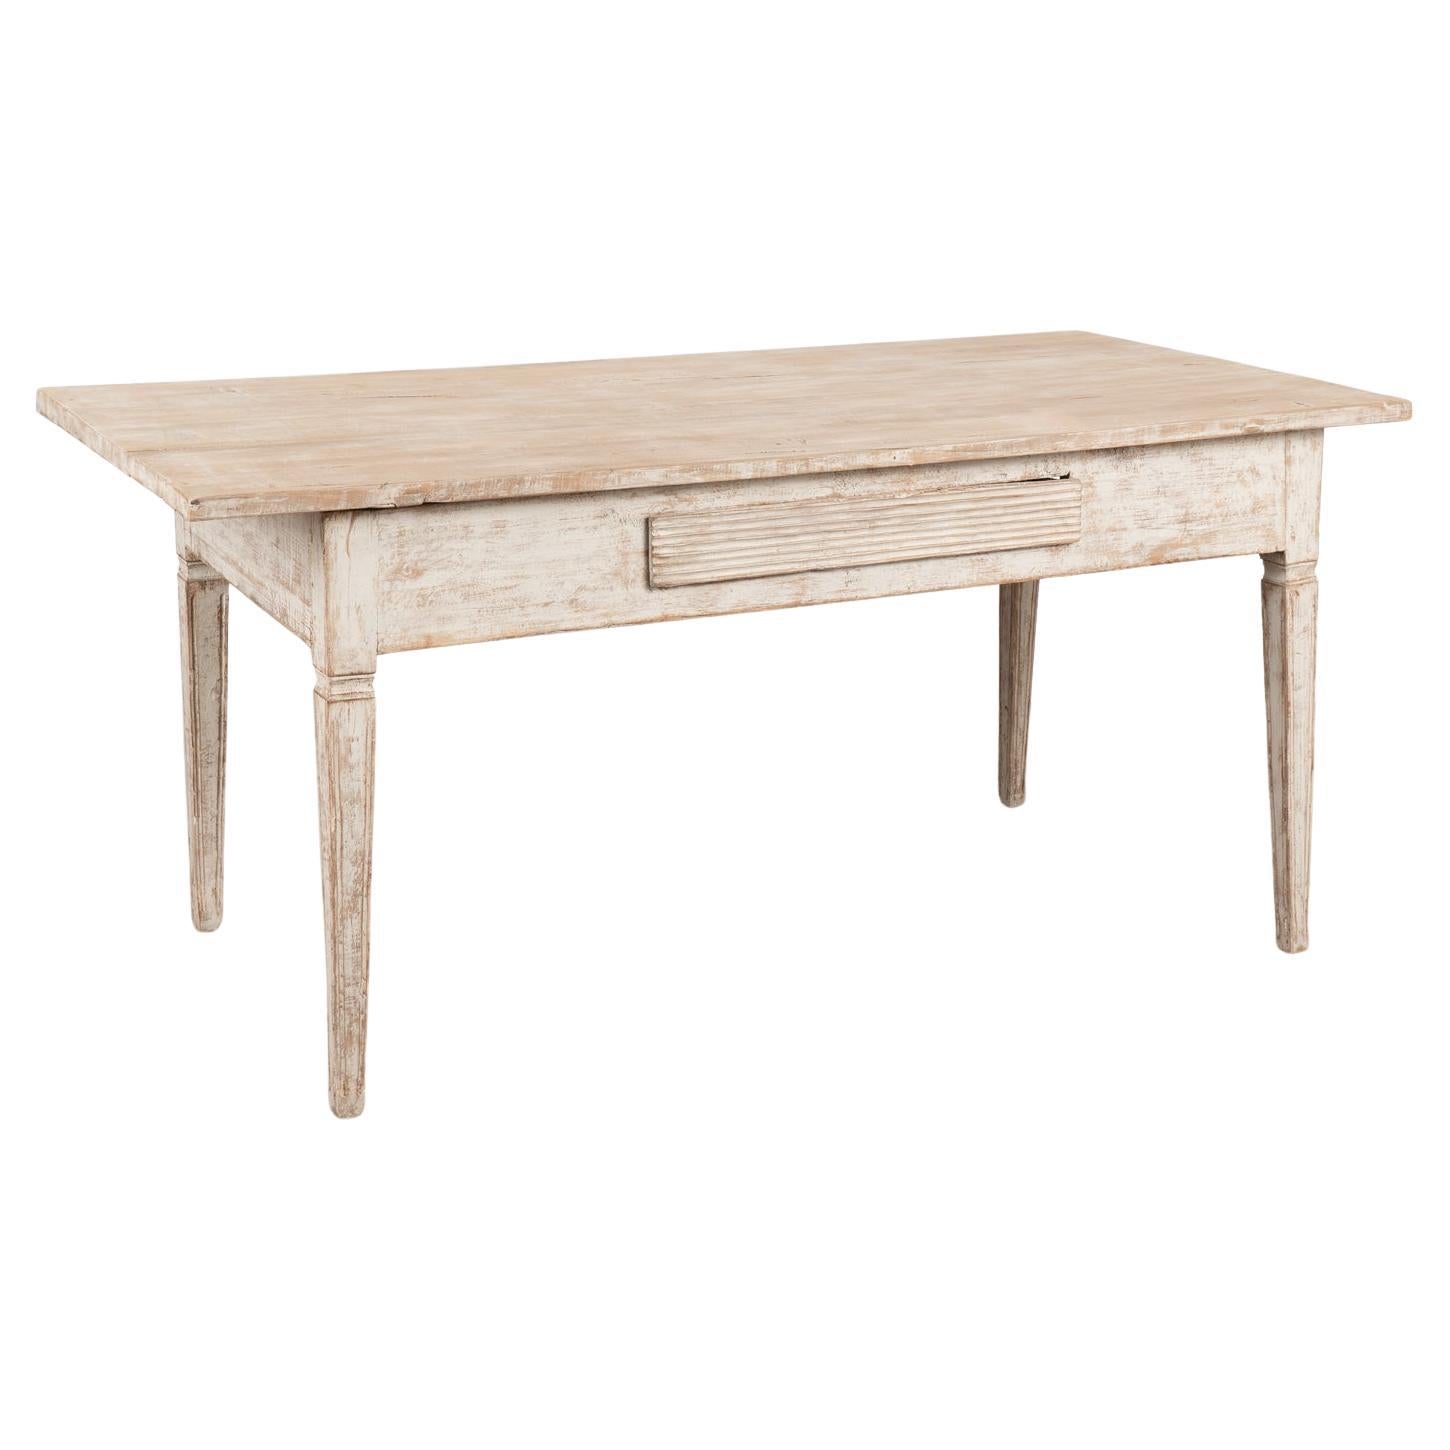 White Painted Gustavian Style Table Writing Desk With One Drawer, circa 1860-80